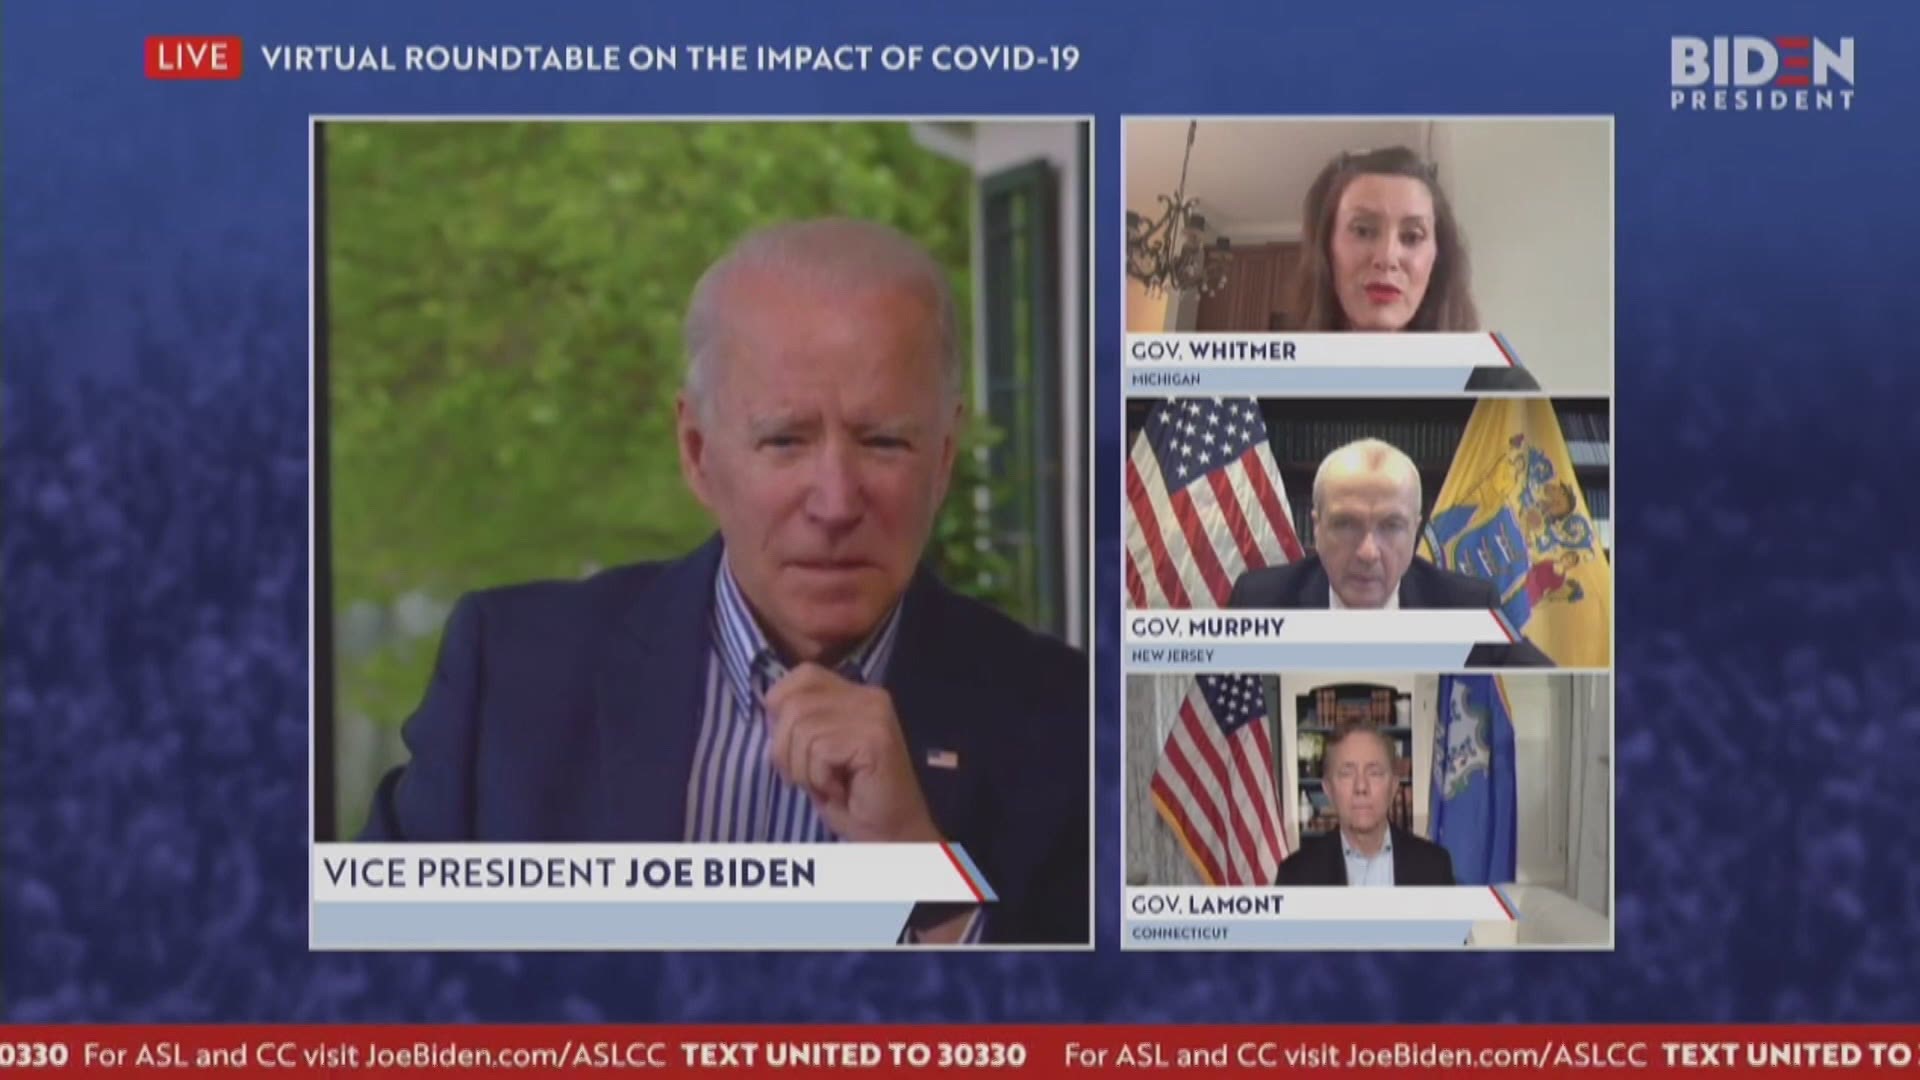 Former Vice President Biden held a roundtable focusing on the COVID-19 response of three U.S. governors, including Gov. Gretchen Whitmer.